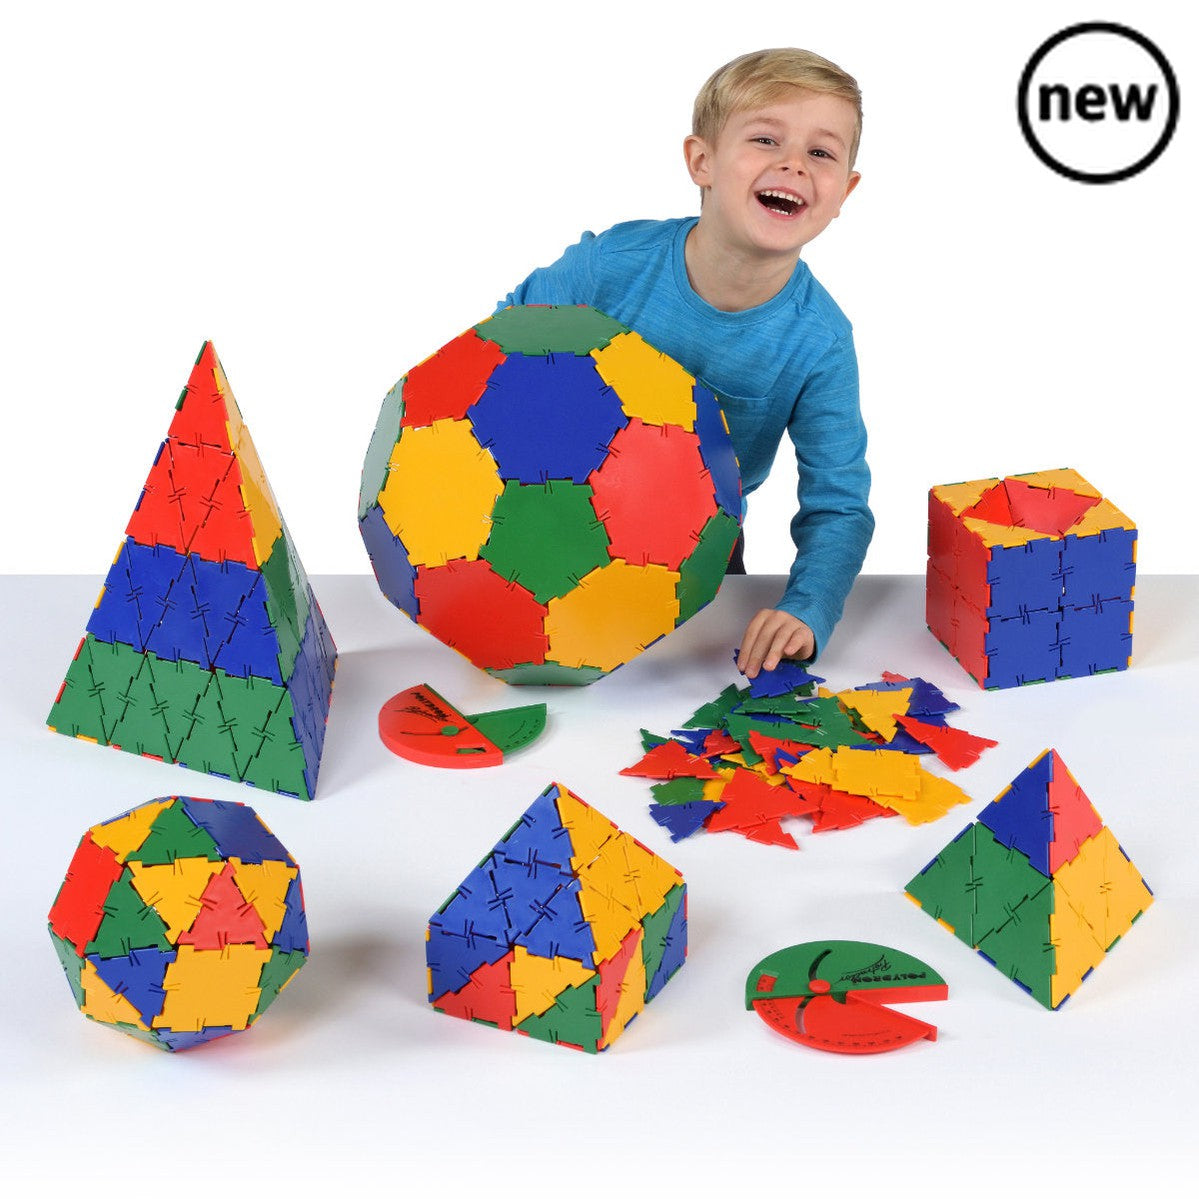 Polydron School Geometry Set, The Polydron School Geometry Set is the ultimate resource for teaching shape and space, 2D and 3D geometry, and design and technology in primary schools. This complete classroom set contains over 400 pieces of different mathematical shapes including squares, triangles, pentagons, hexagons, right angle triangles, isosceles triangles, large equilateral triangles, rectangles and octagons.Supplied in four vibrant colours, this set is designed to be used in conjunction with the 'Pri